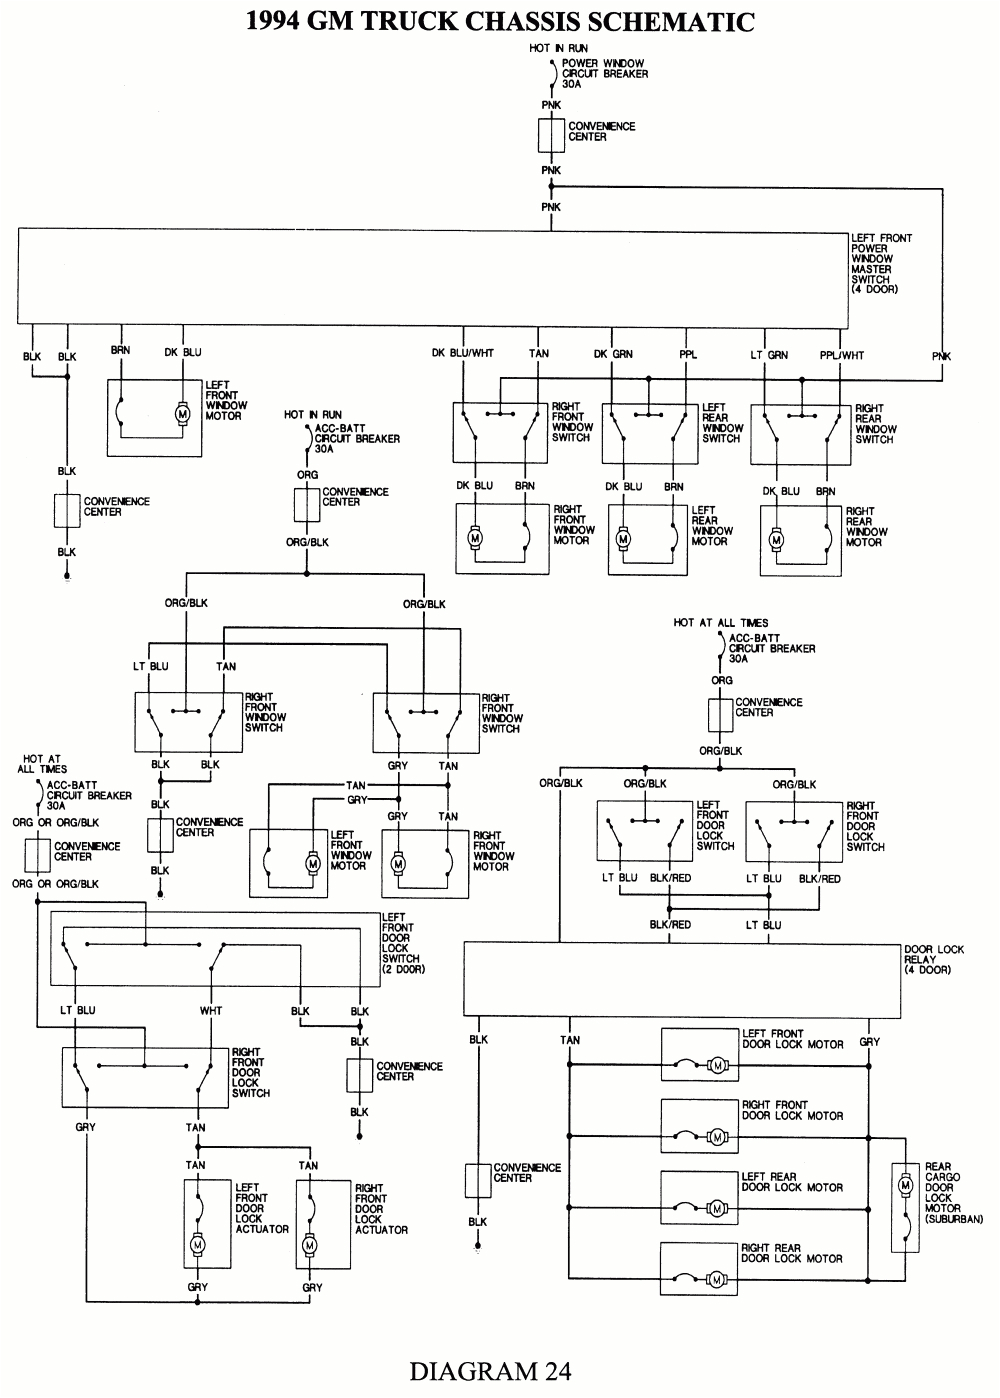 2004 Chevy Tahoe Stereo Wiring Diagram 2004 Chevy Tahoe Radio Wiring Diagram Wiring Diagram